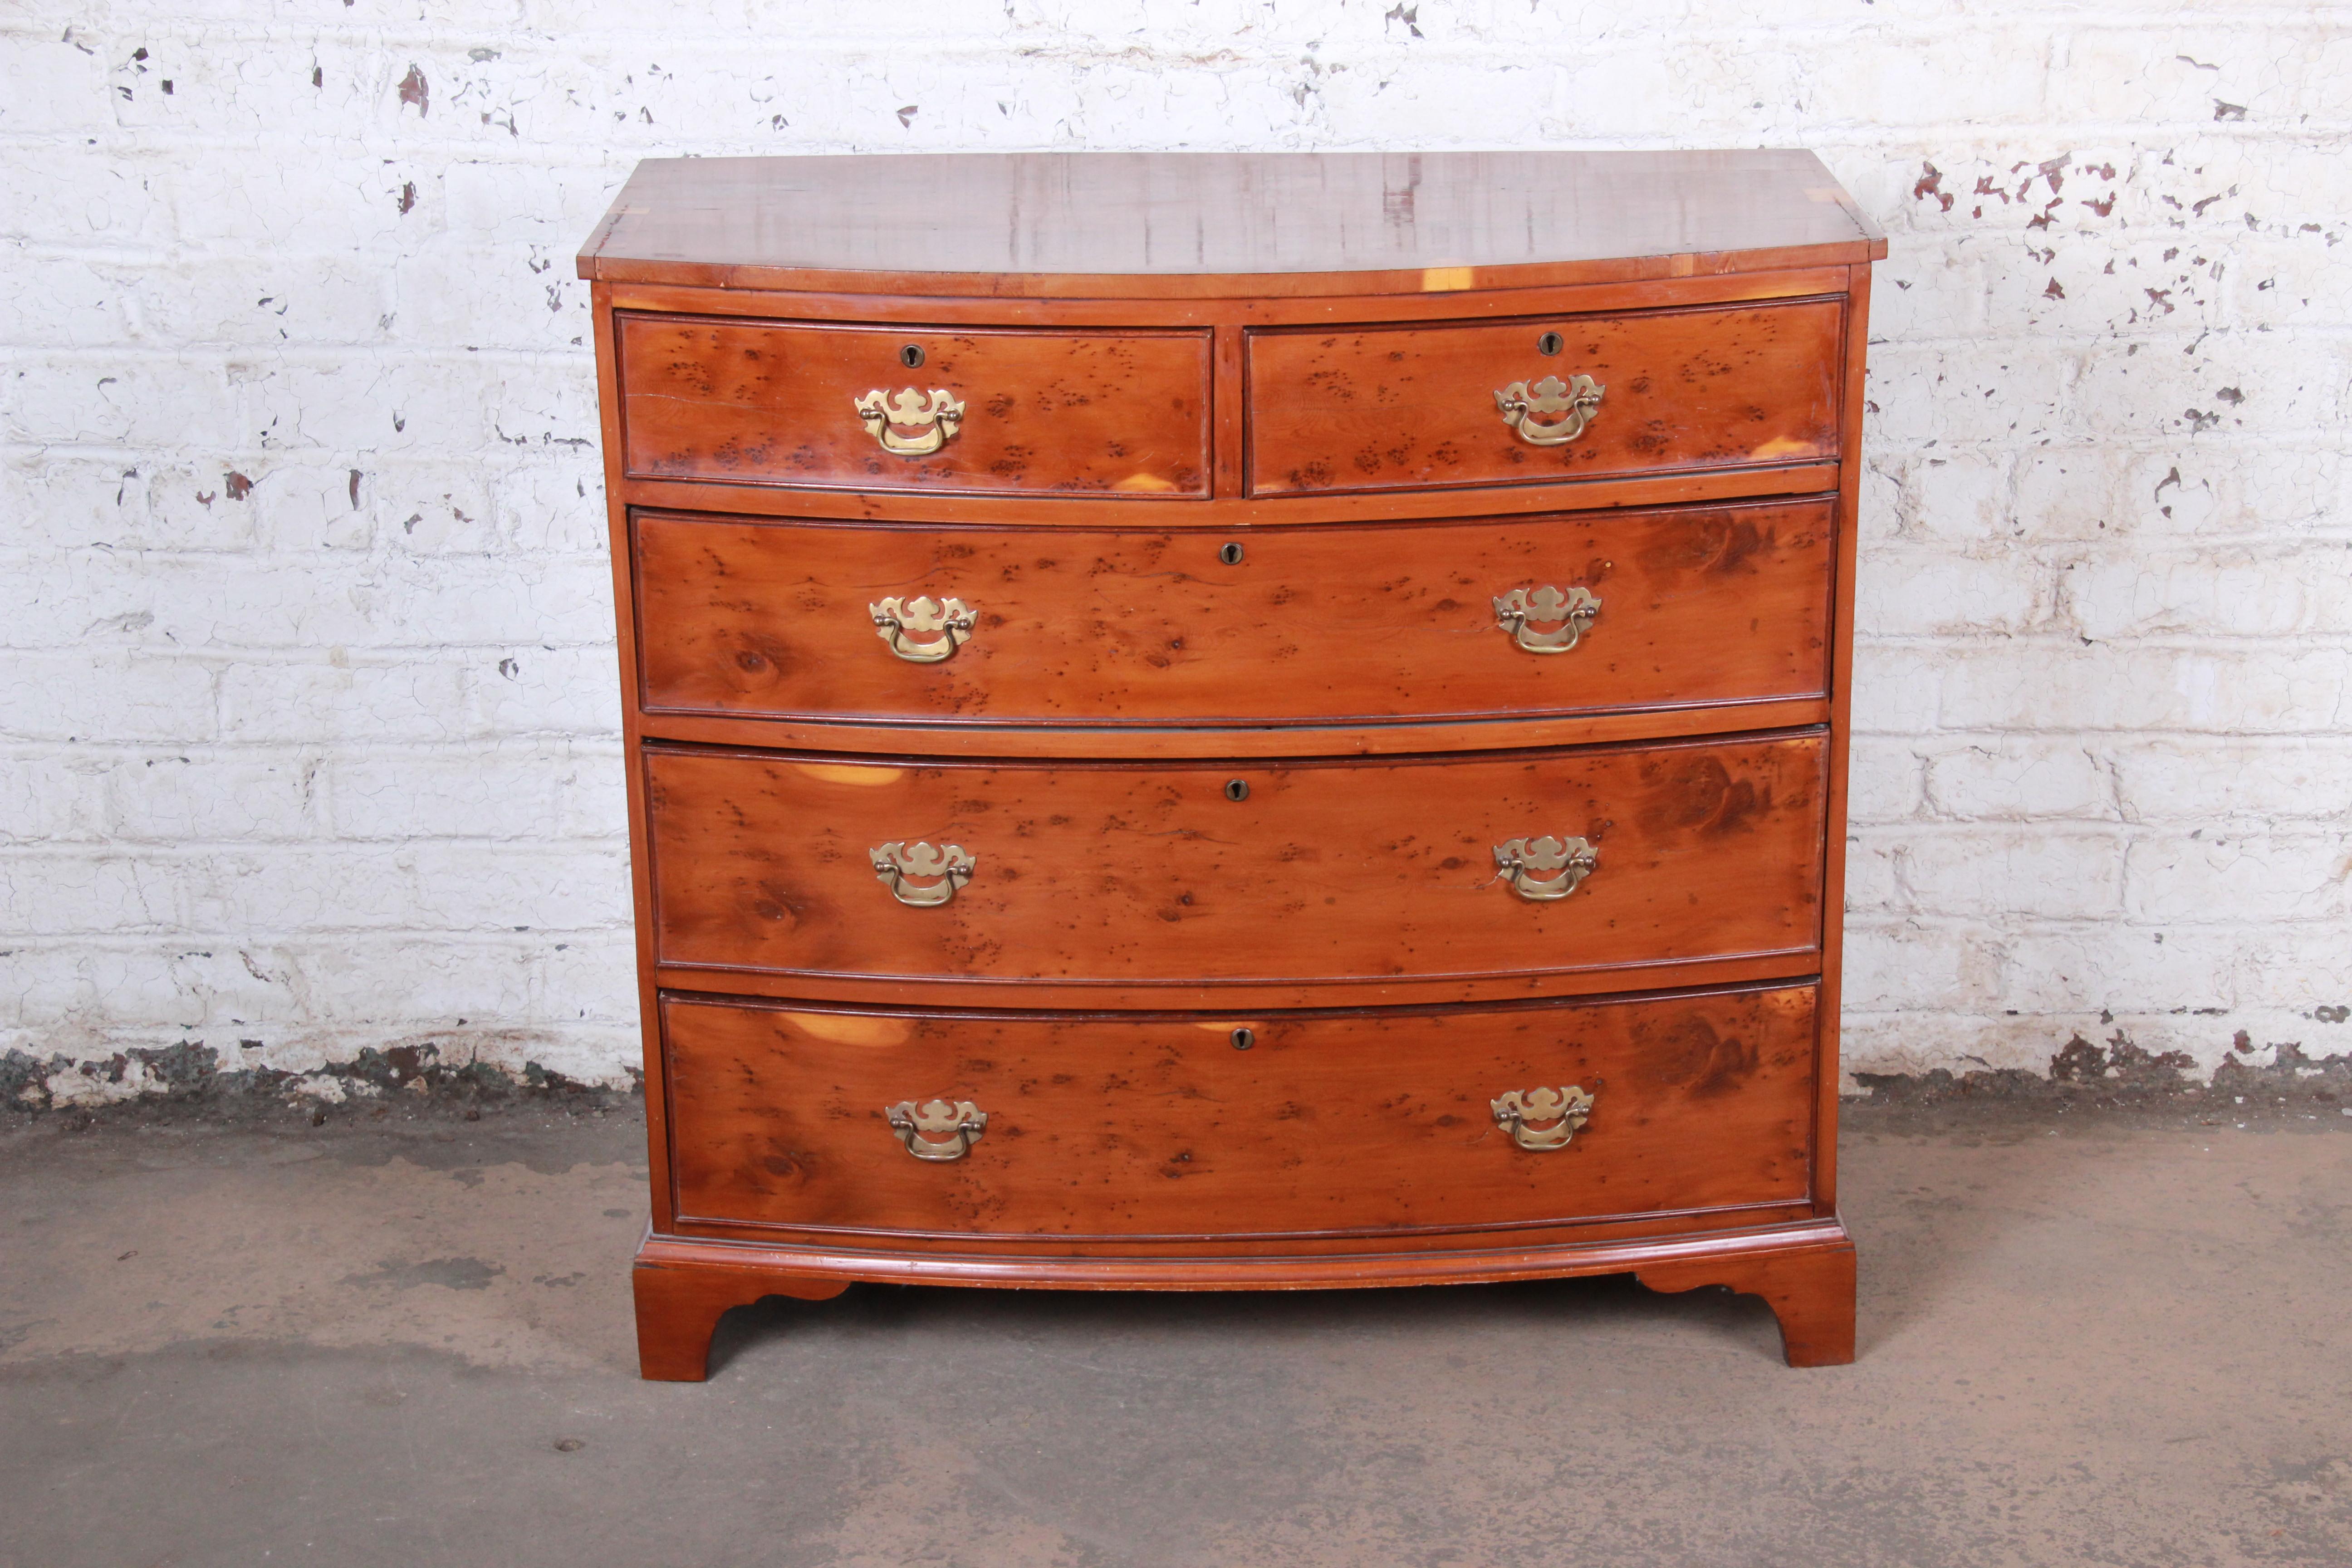 A gorgeous antique Georgian bow front yew wood five-drawer dresser chest

England, circa 1850

Yew wood and brass hardware

Measures: 41.38